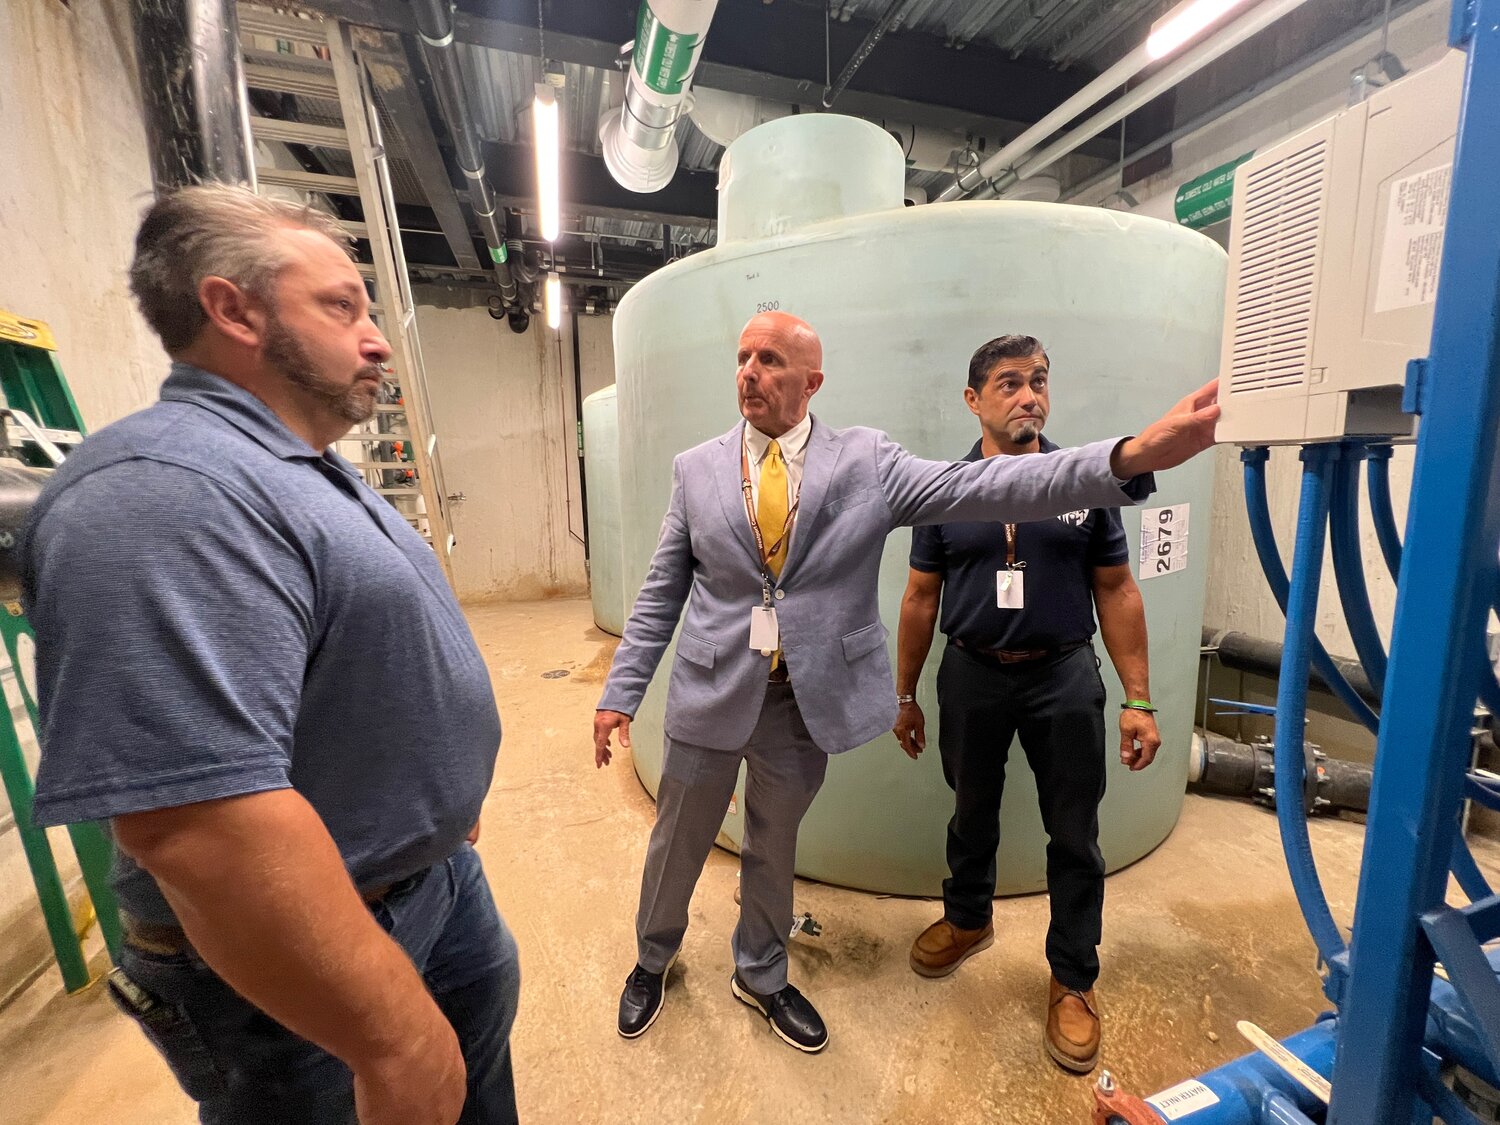 Superintendent Thomas Aubin (center) inspects one of the Middle/High School's two 3,000-gallon tanks Wednesday afternoon. At left is Public Health Director Matt Armendo and at right, Manny Moniz, the district's facilities director.